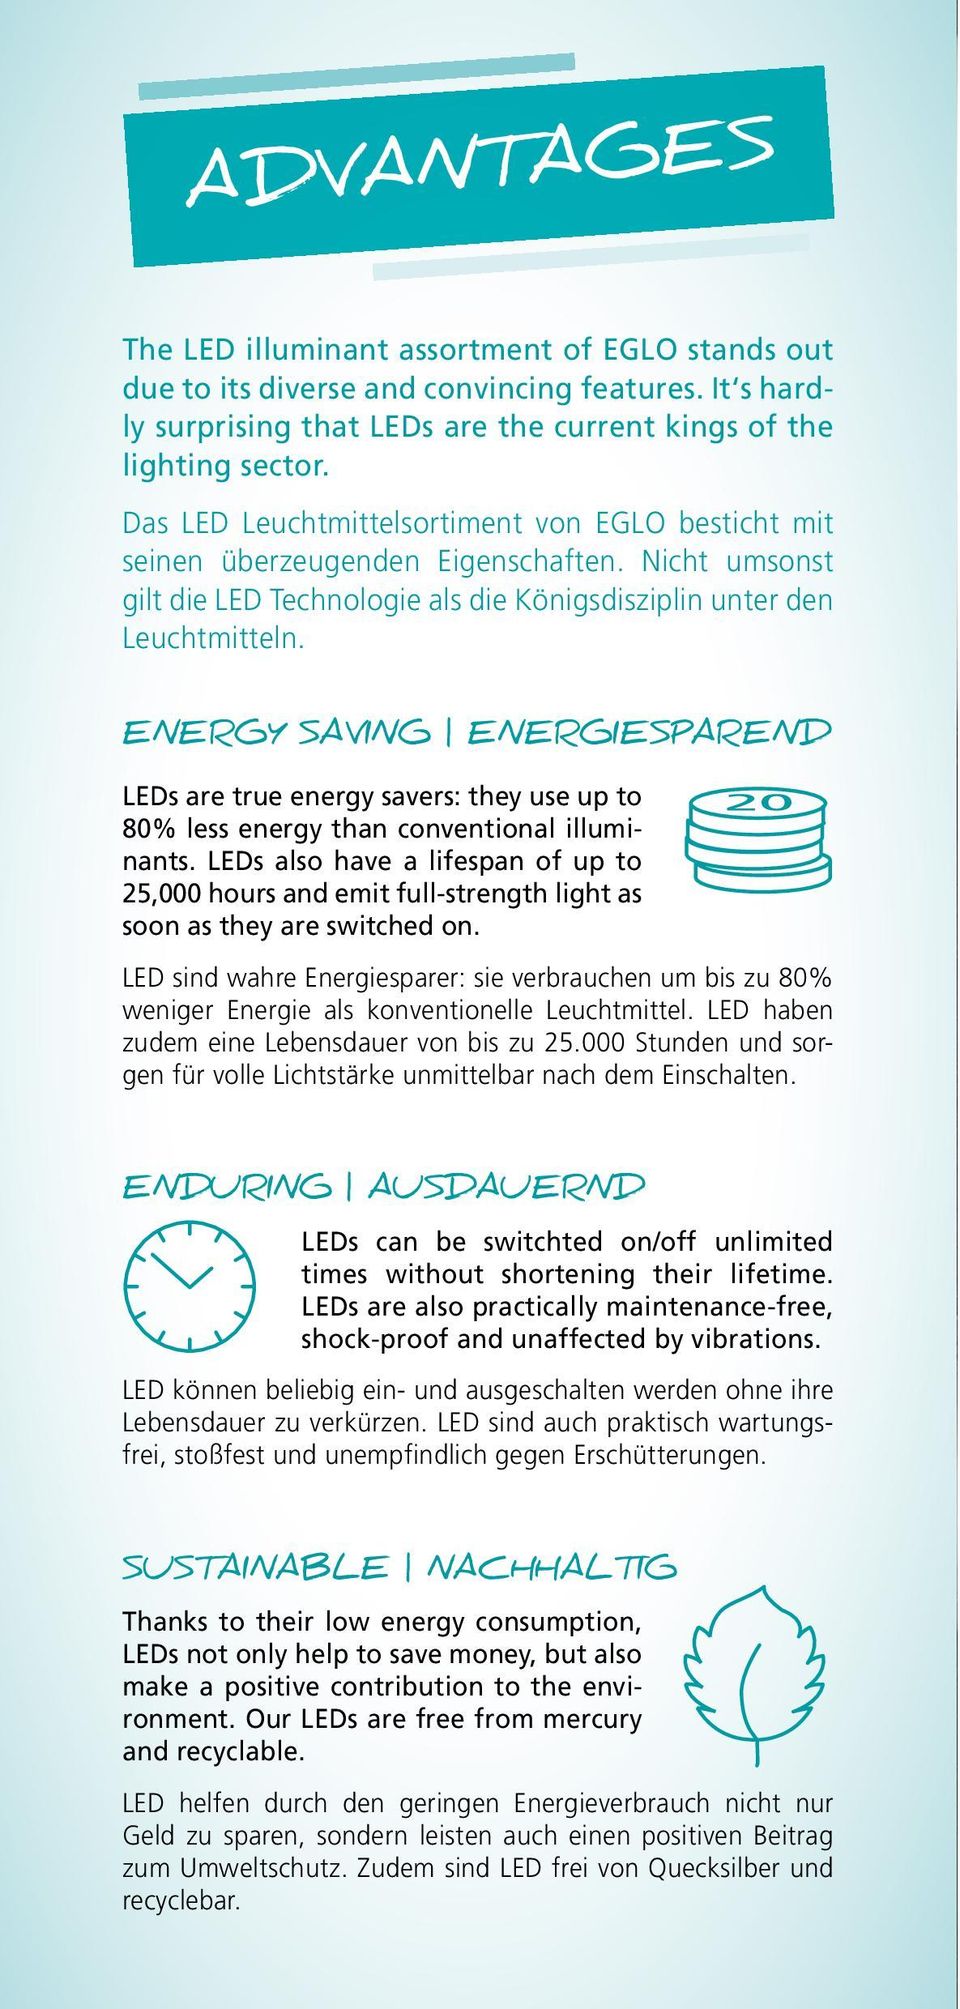 ENERGY SAVING ENERGIESPAREND LEDs are true energy savers: they use up to 80% less energy than conventional illuminants.